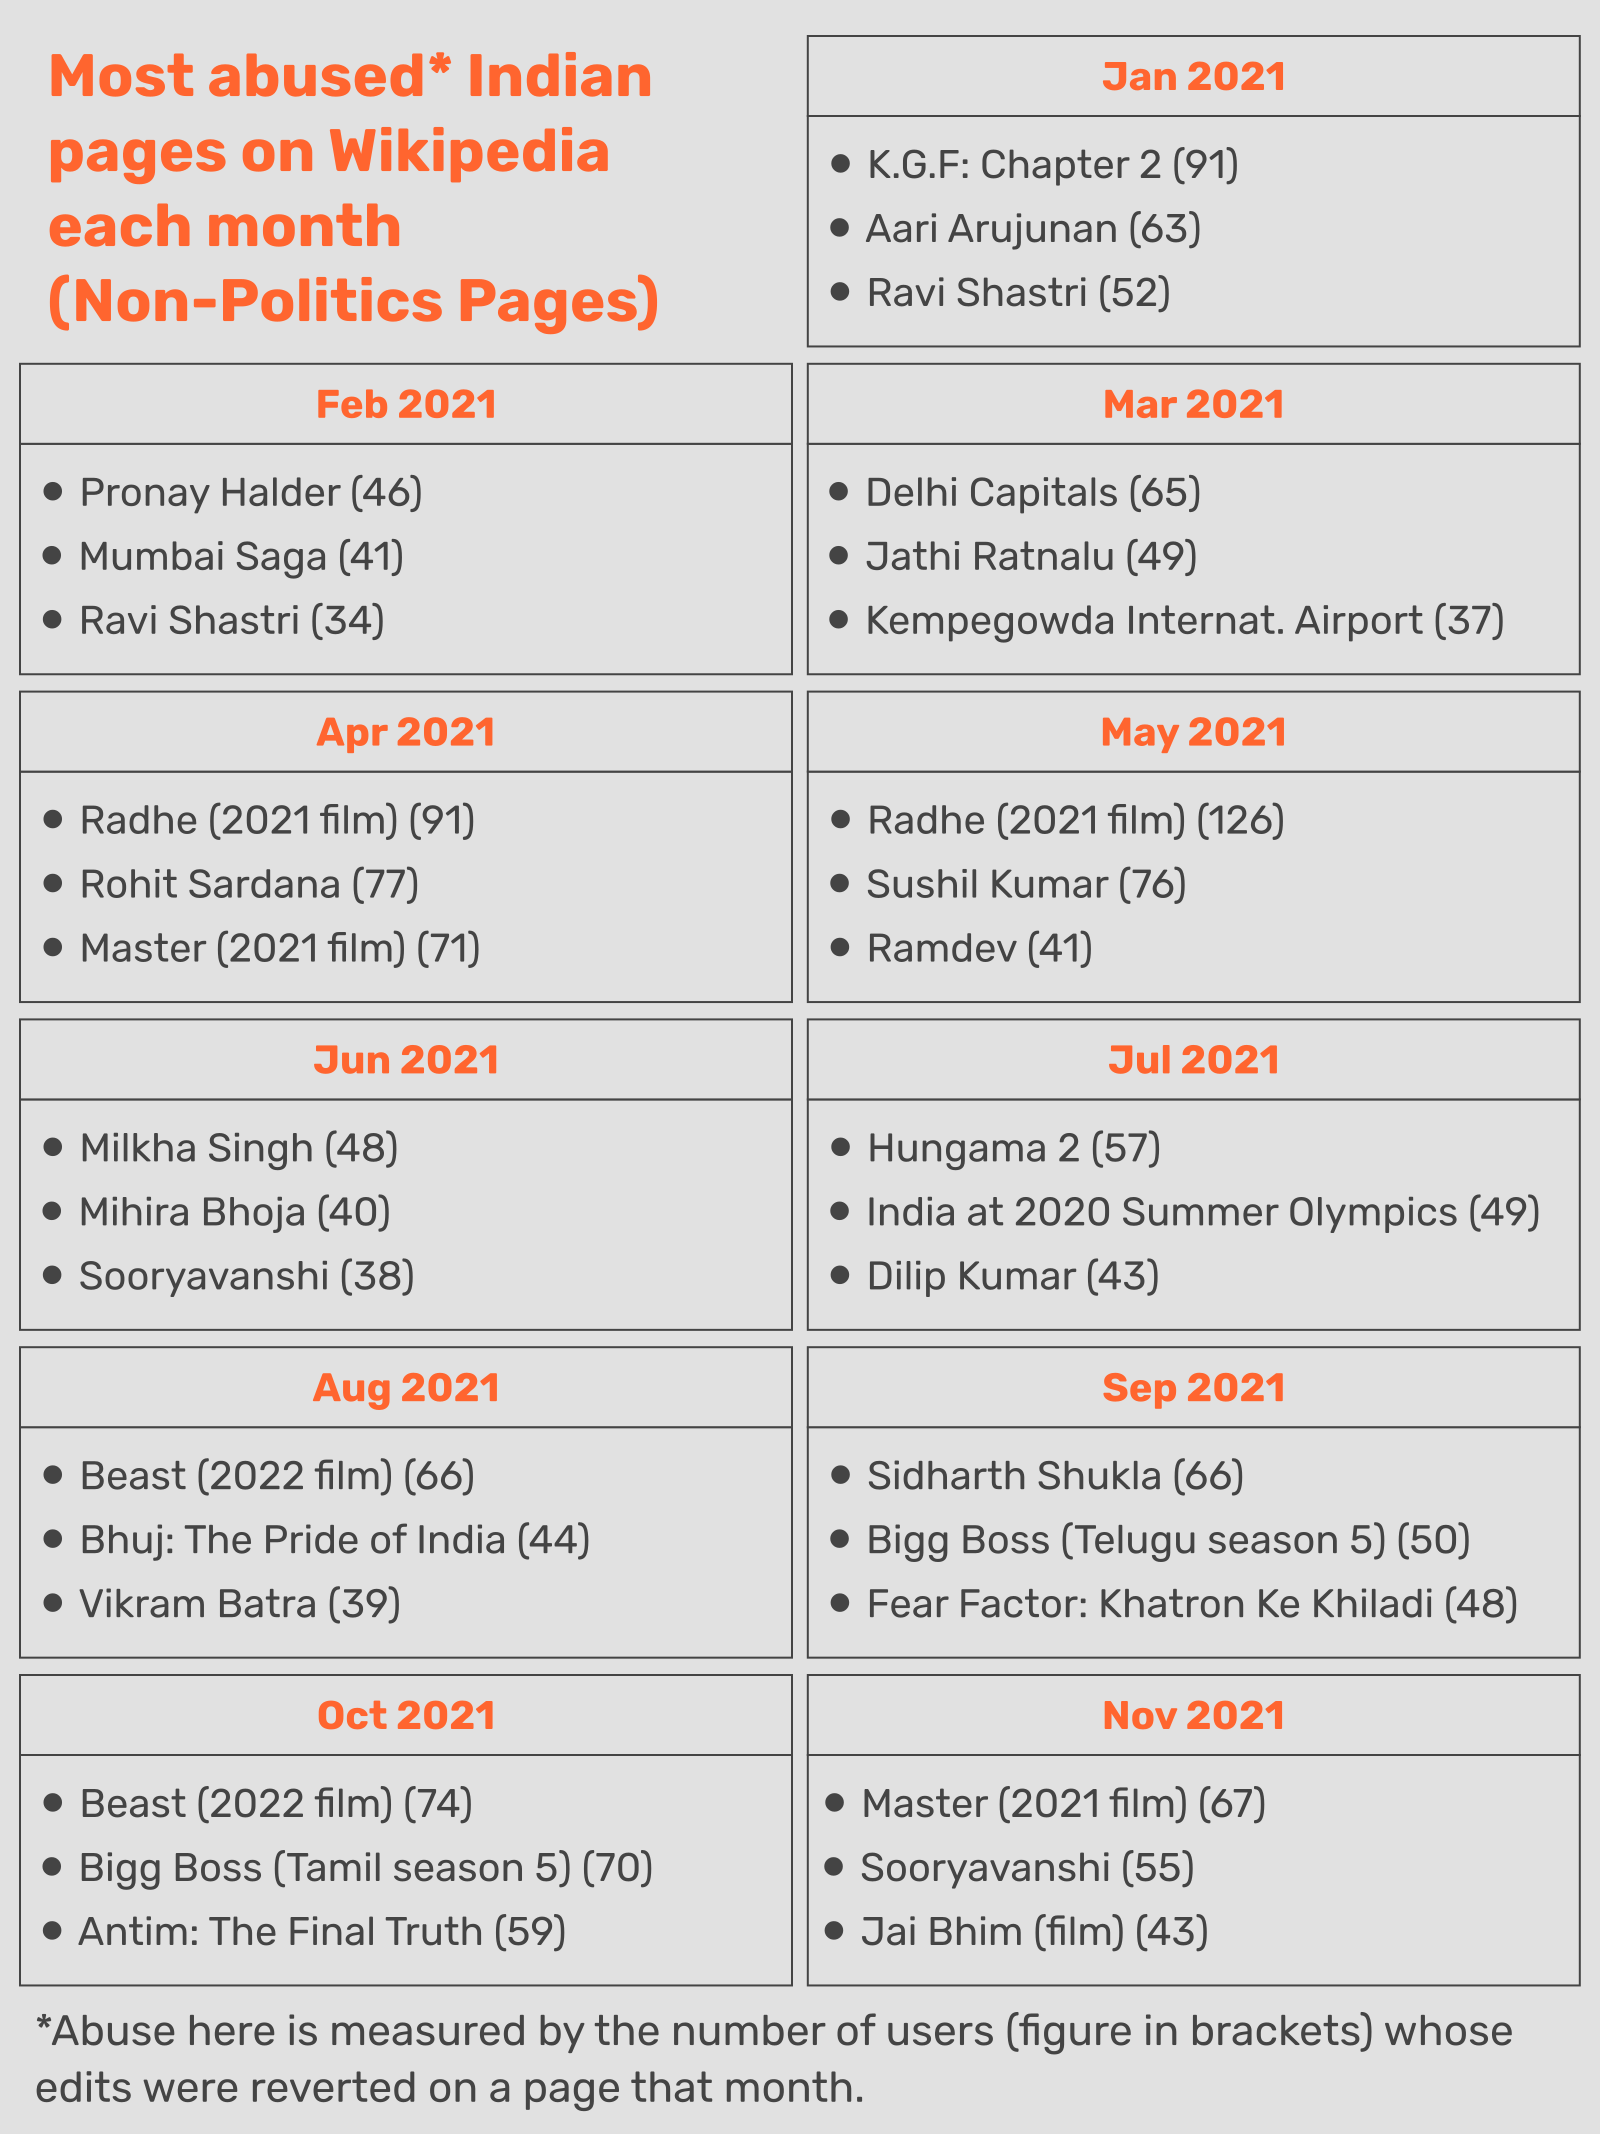 Most abused Indian pages on Wikipedia each month -- Non-Politics Pages